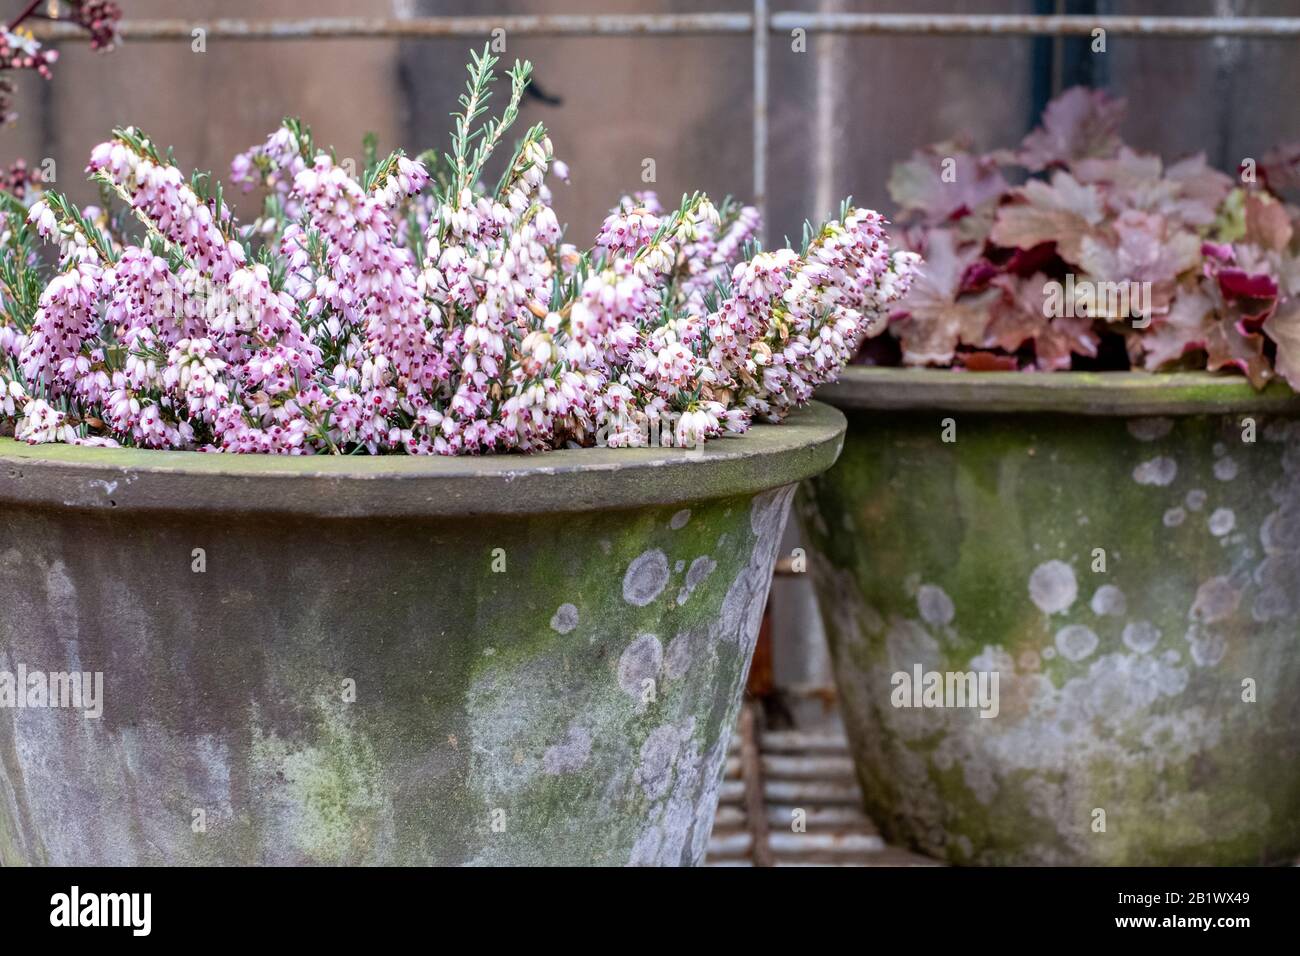 Ceramic pot of pink flowered heather on woody stems with pot of red heuchera behind Stock Photo